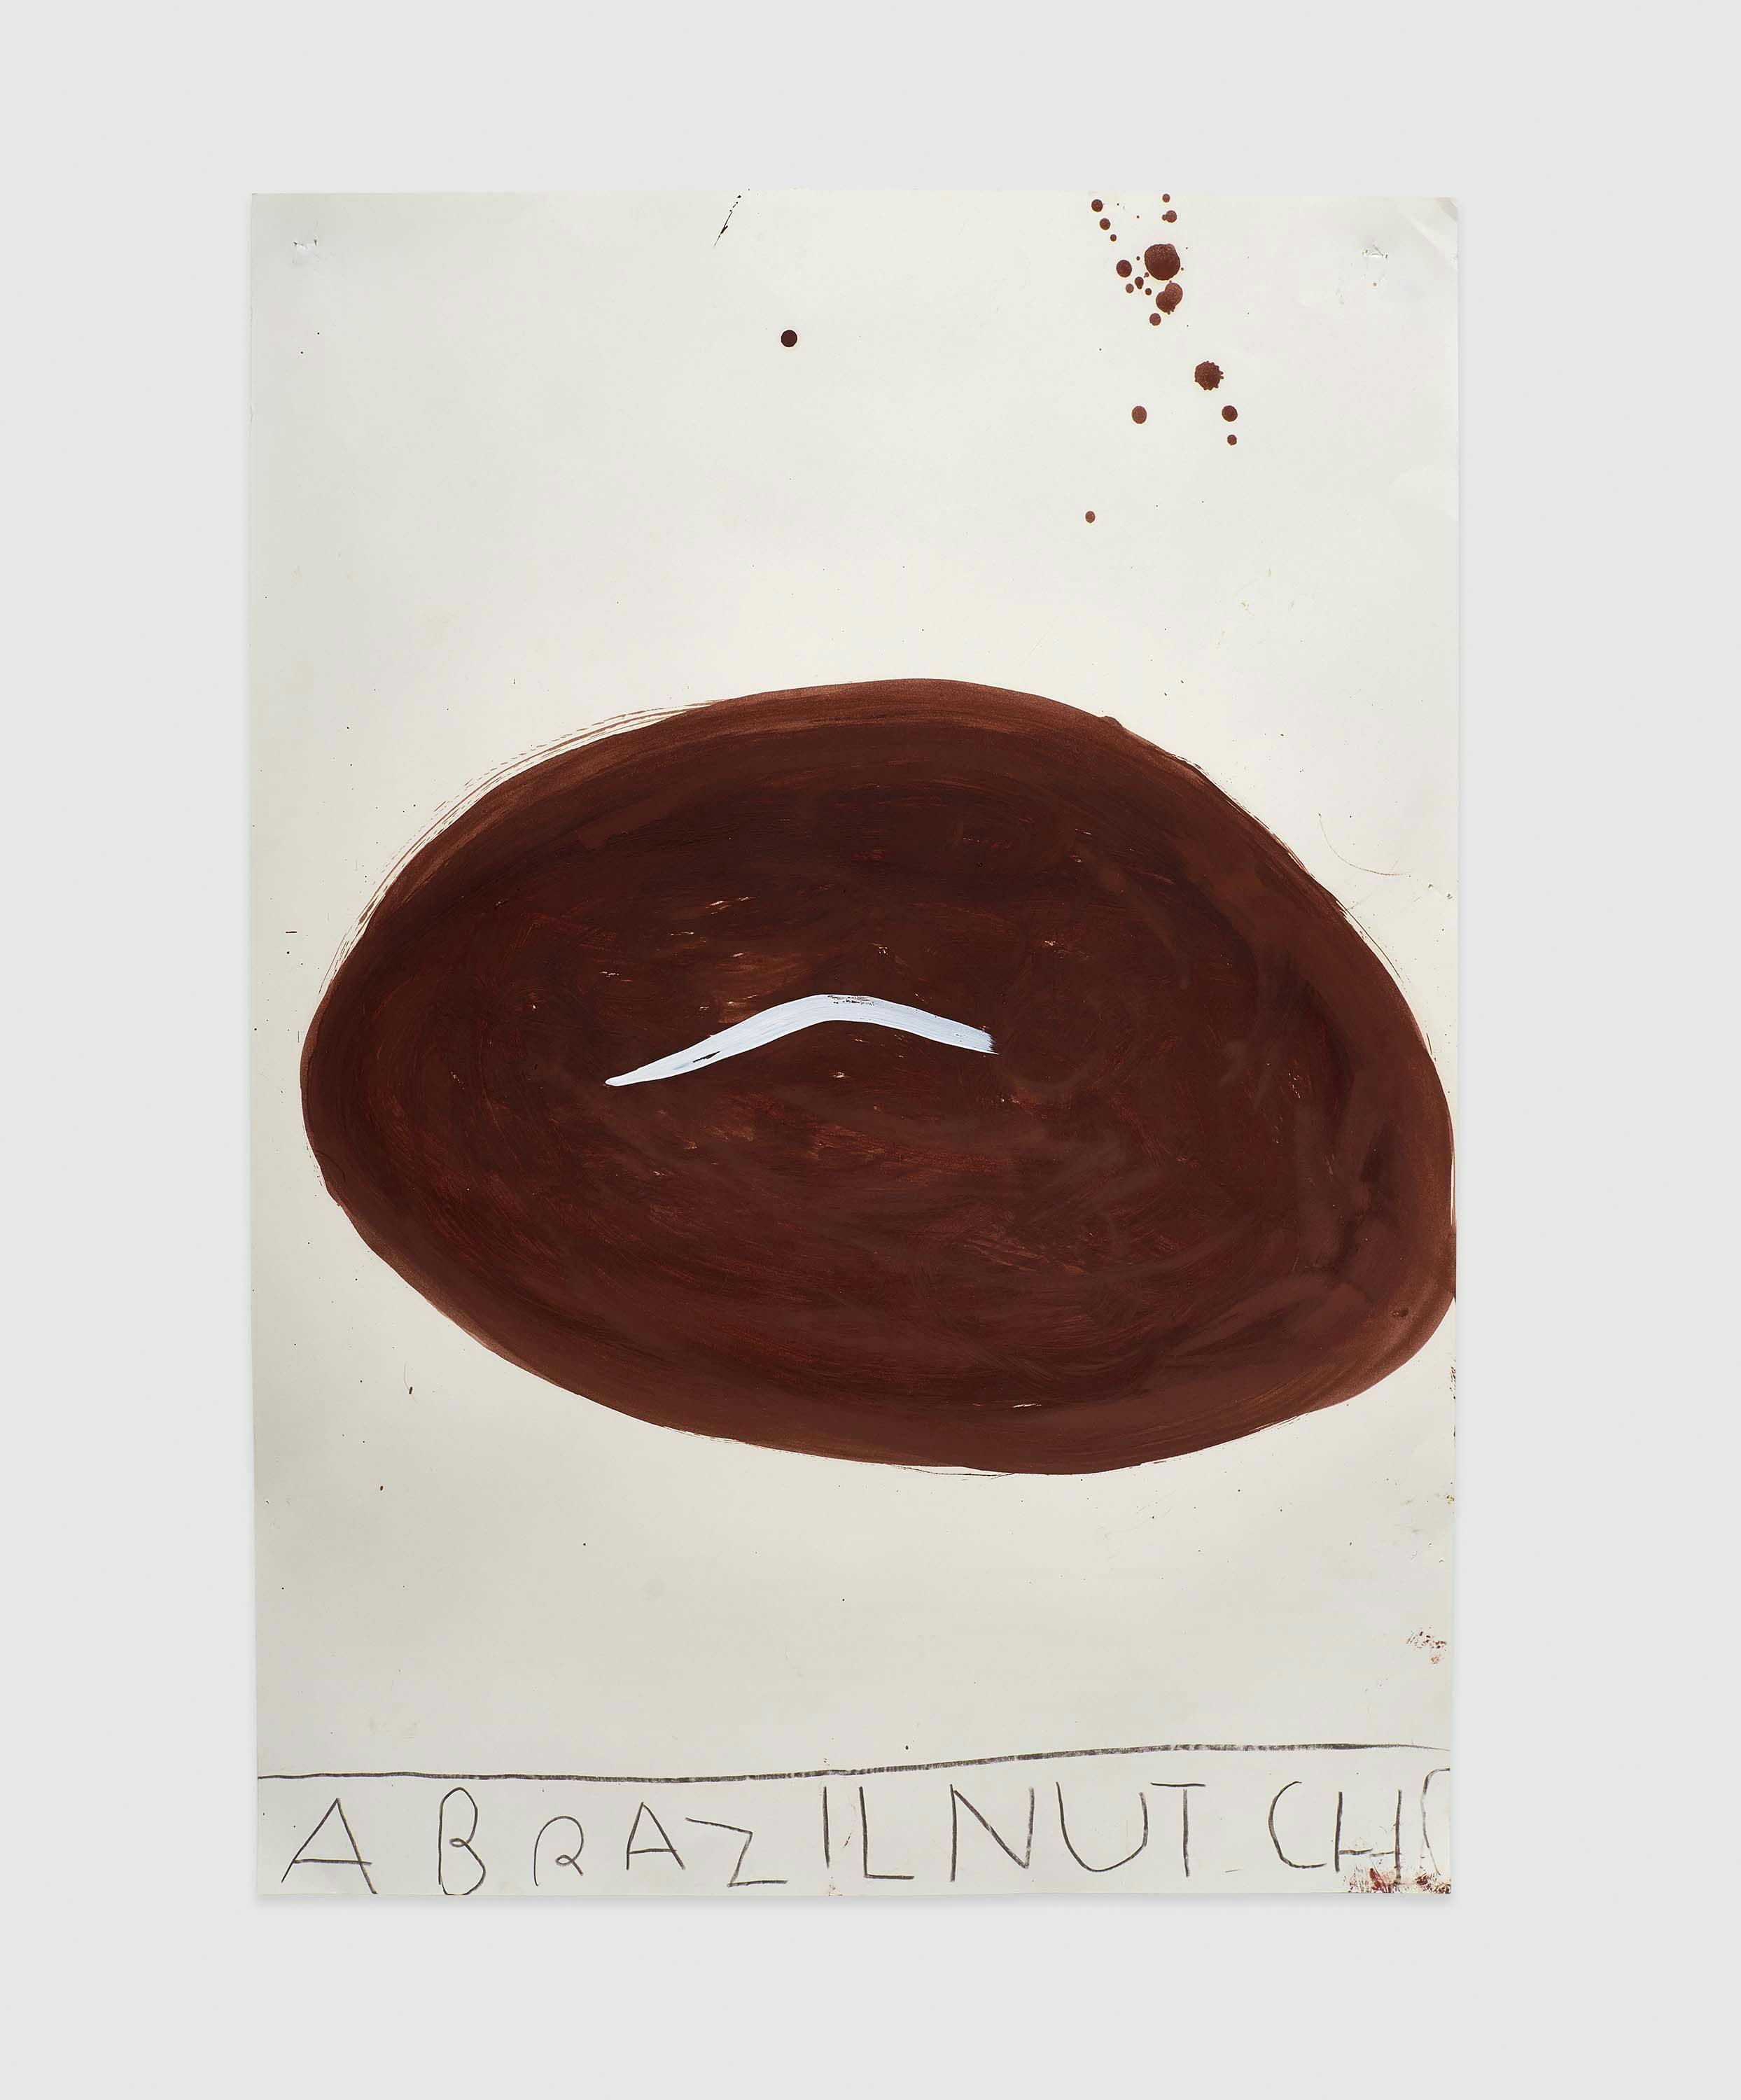 A work on paper by Rose Wylie, titled Brazil Nut, Choc, dated 2016.